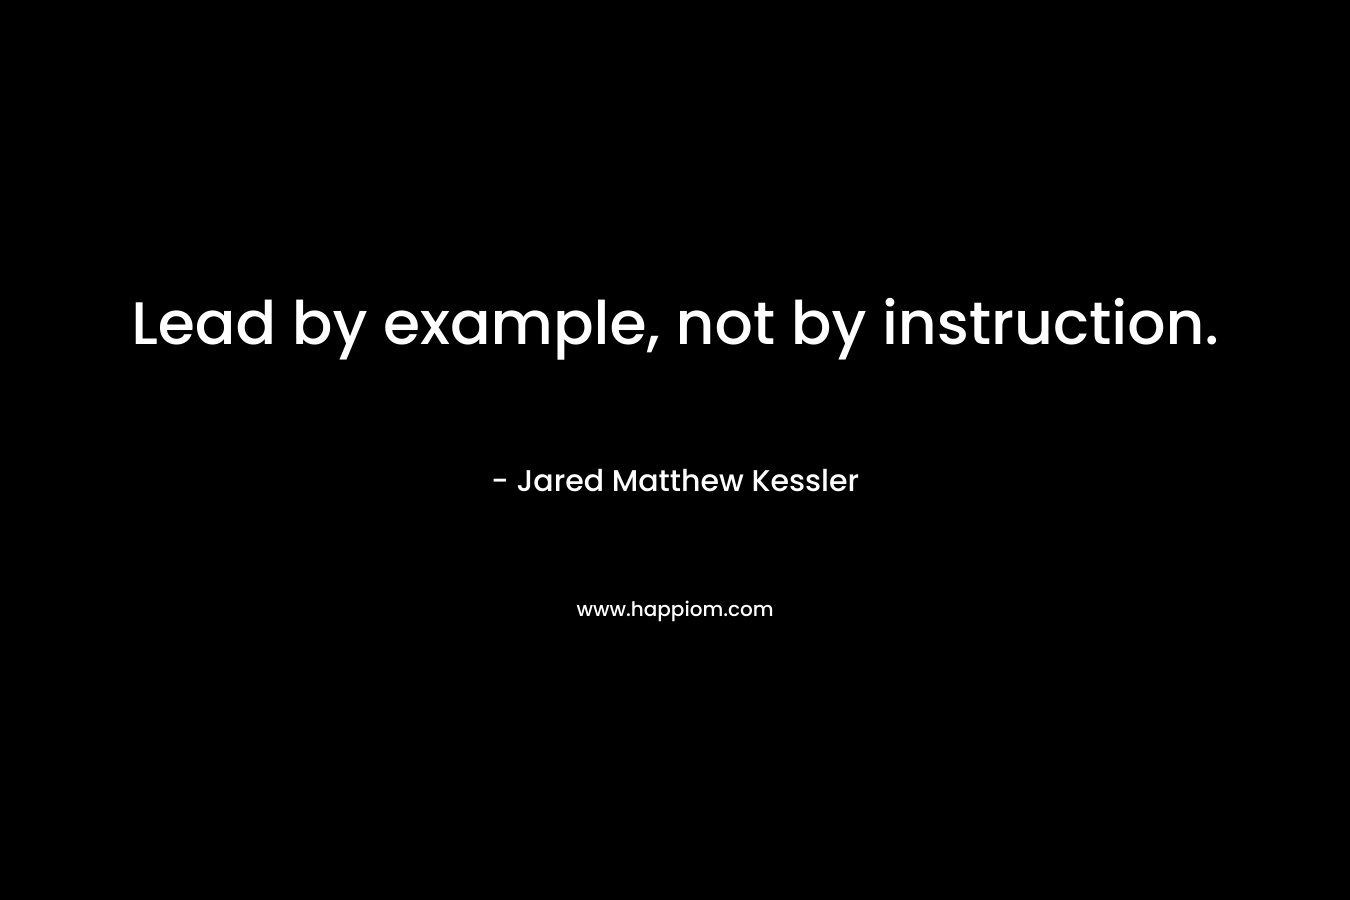 Lead by example, not by instruction.